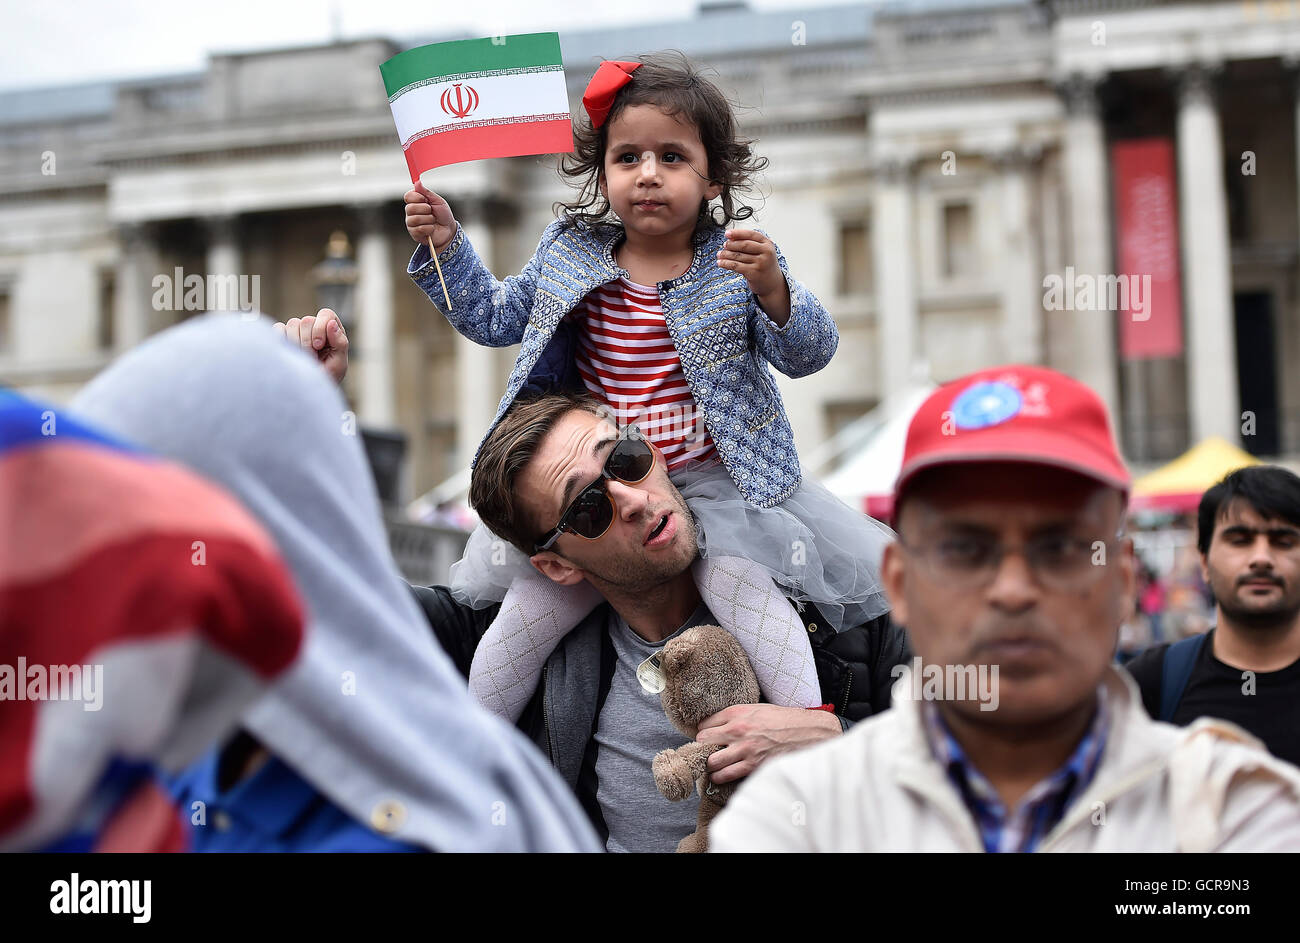 People celebrate Eid Festival in Trafalgar Square in central London, to mark the end of Ramadan, the Islamic holy month of fasting. Stock Photo